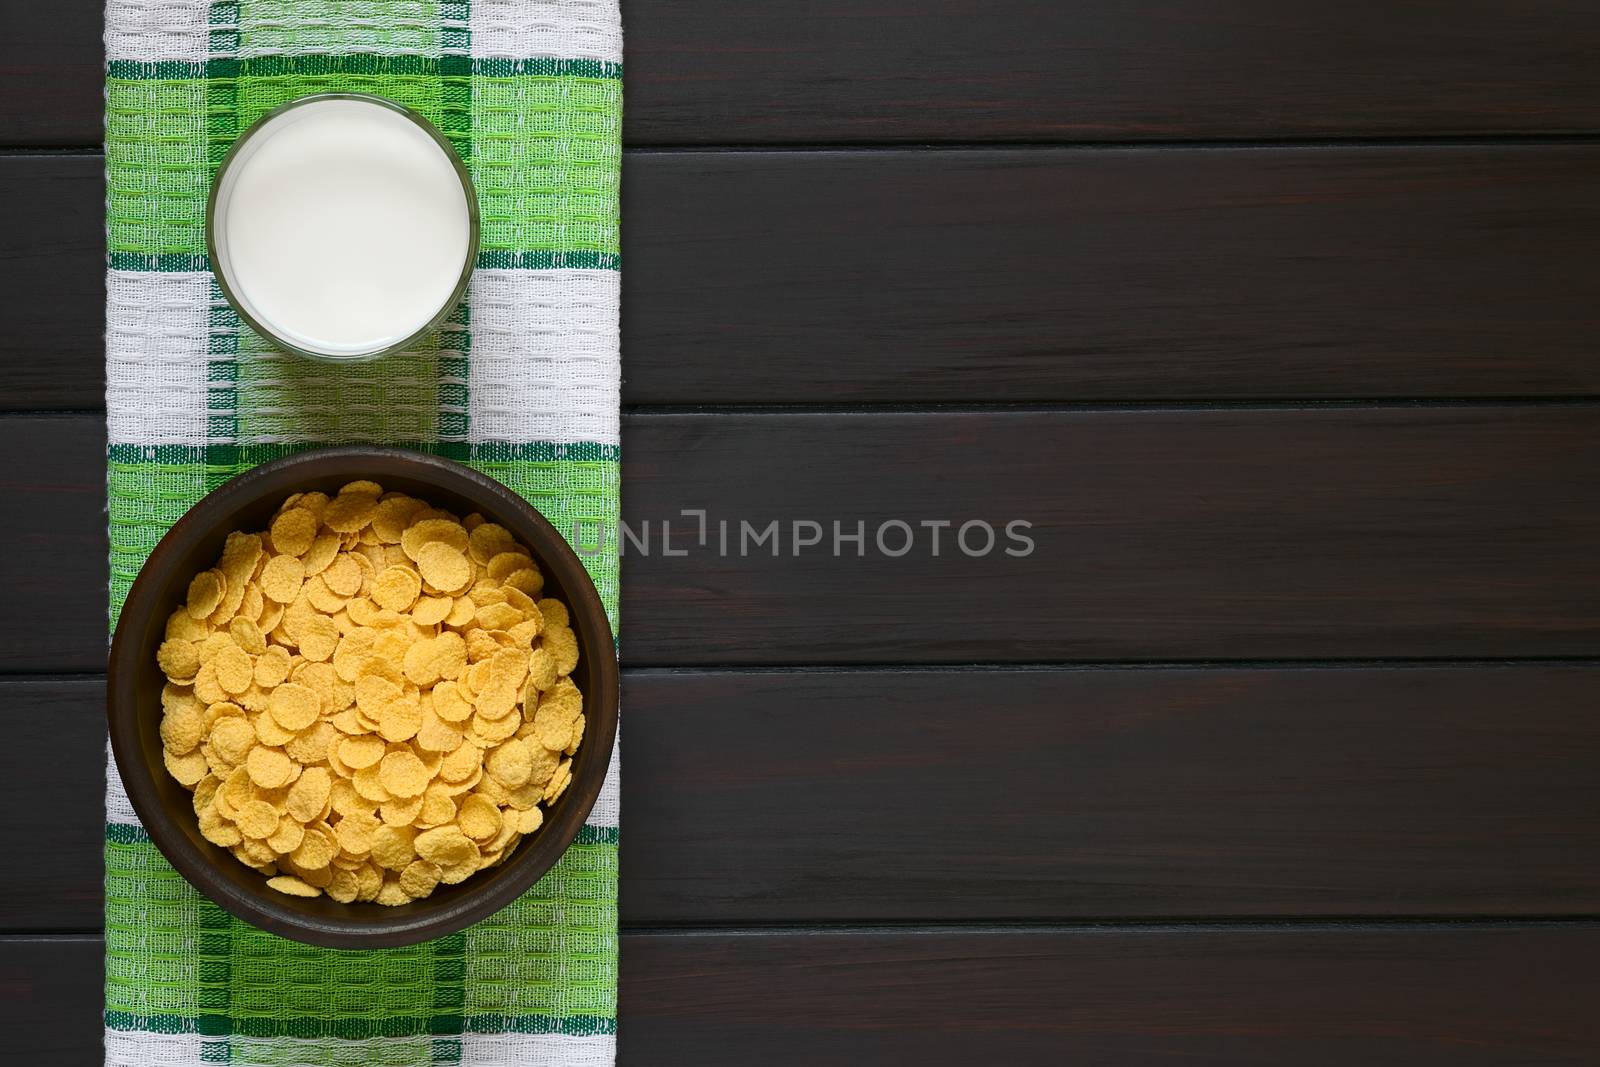 Crispy corn flakes breakfast cereal in rustic bowl with a glass of milk, photographed overhead on dark wood with natural light